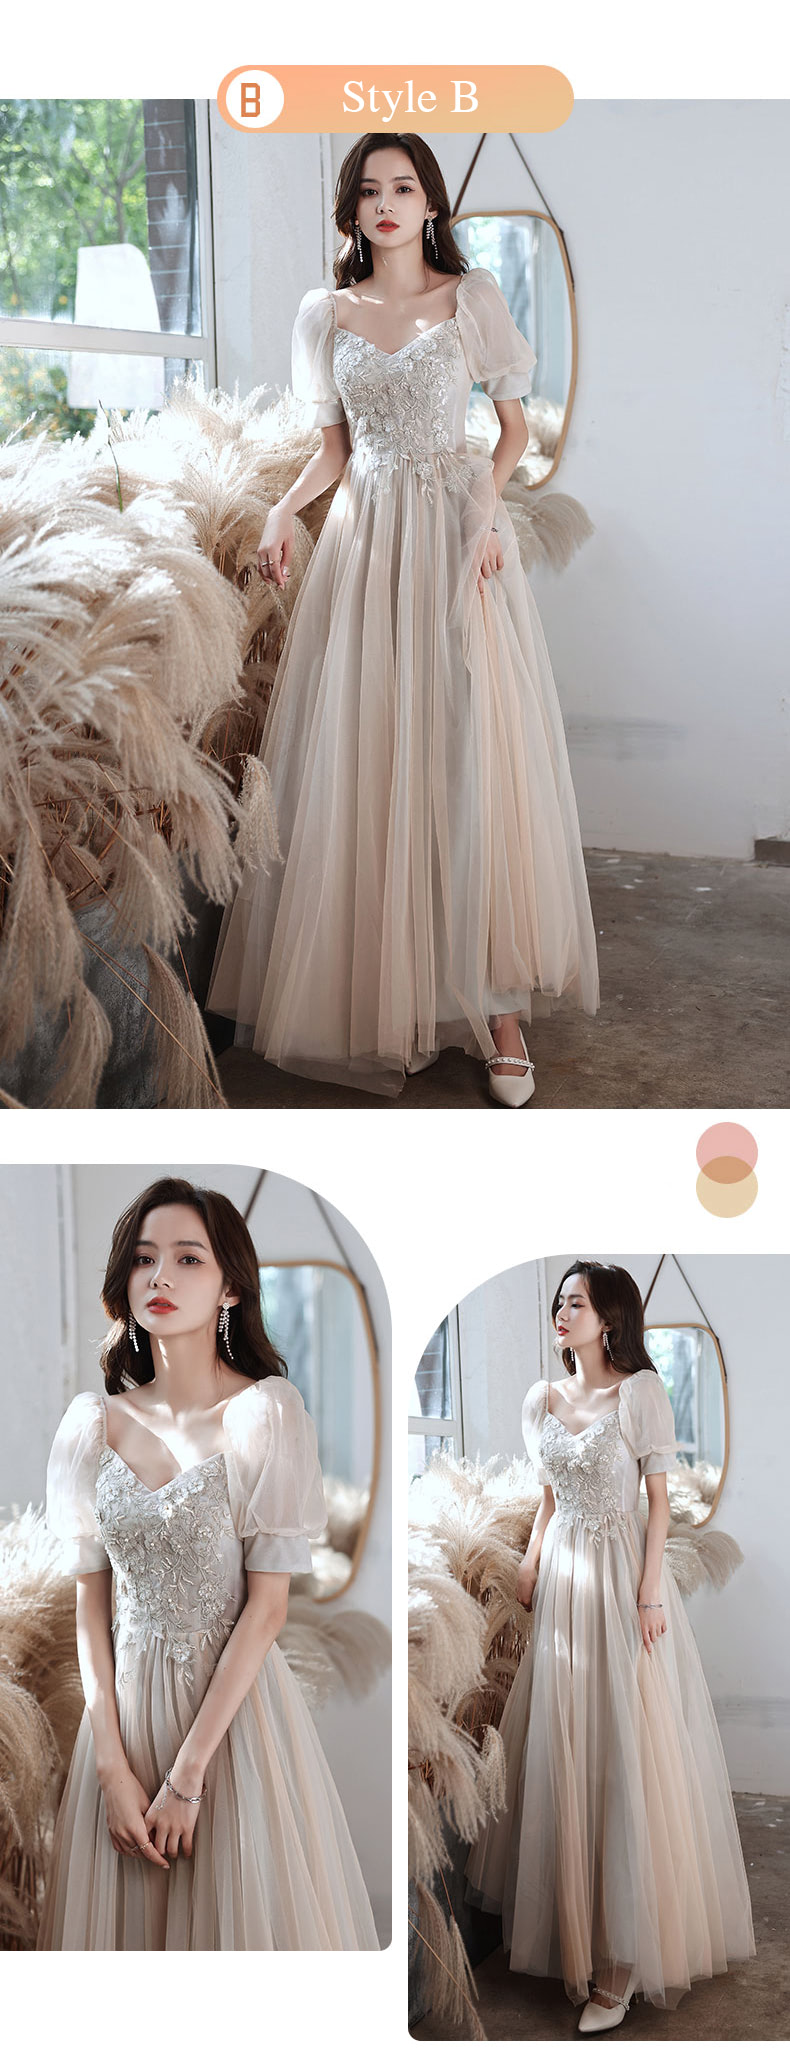 Multiway-Maxi-Bridesmaid-Dress-Wedding-Guest-Long-Formal-Outfit16.jpg